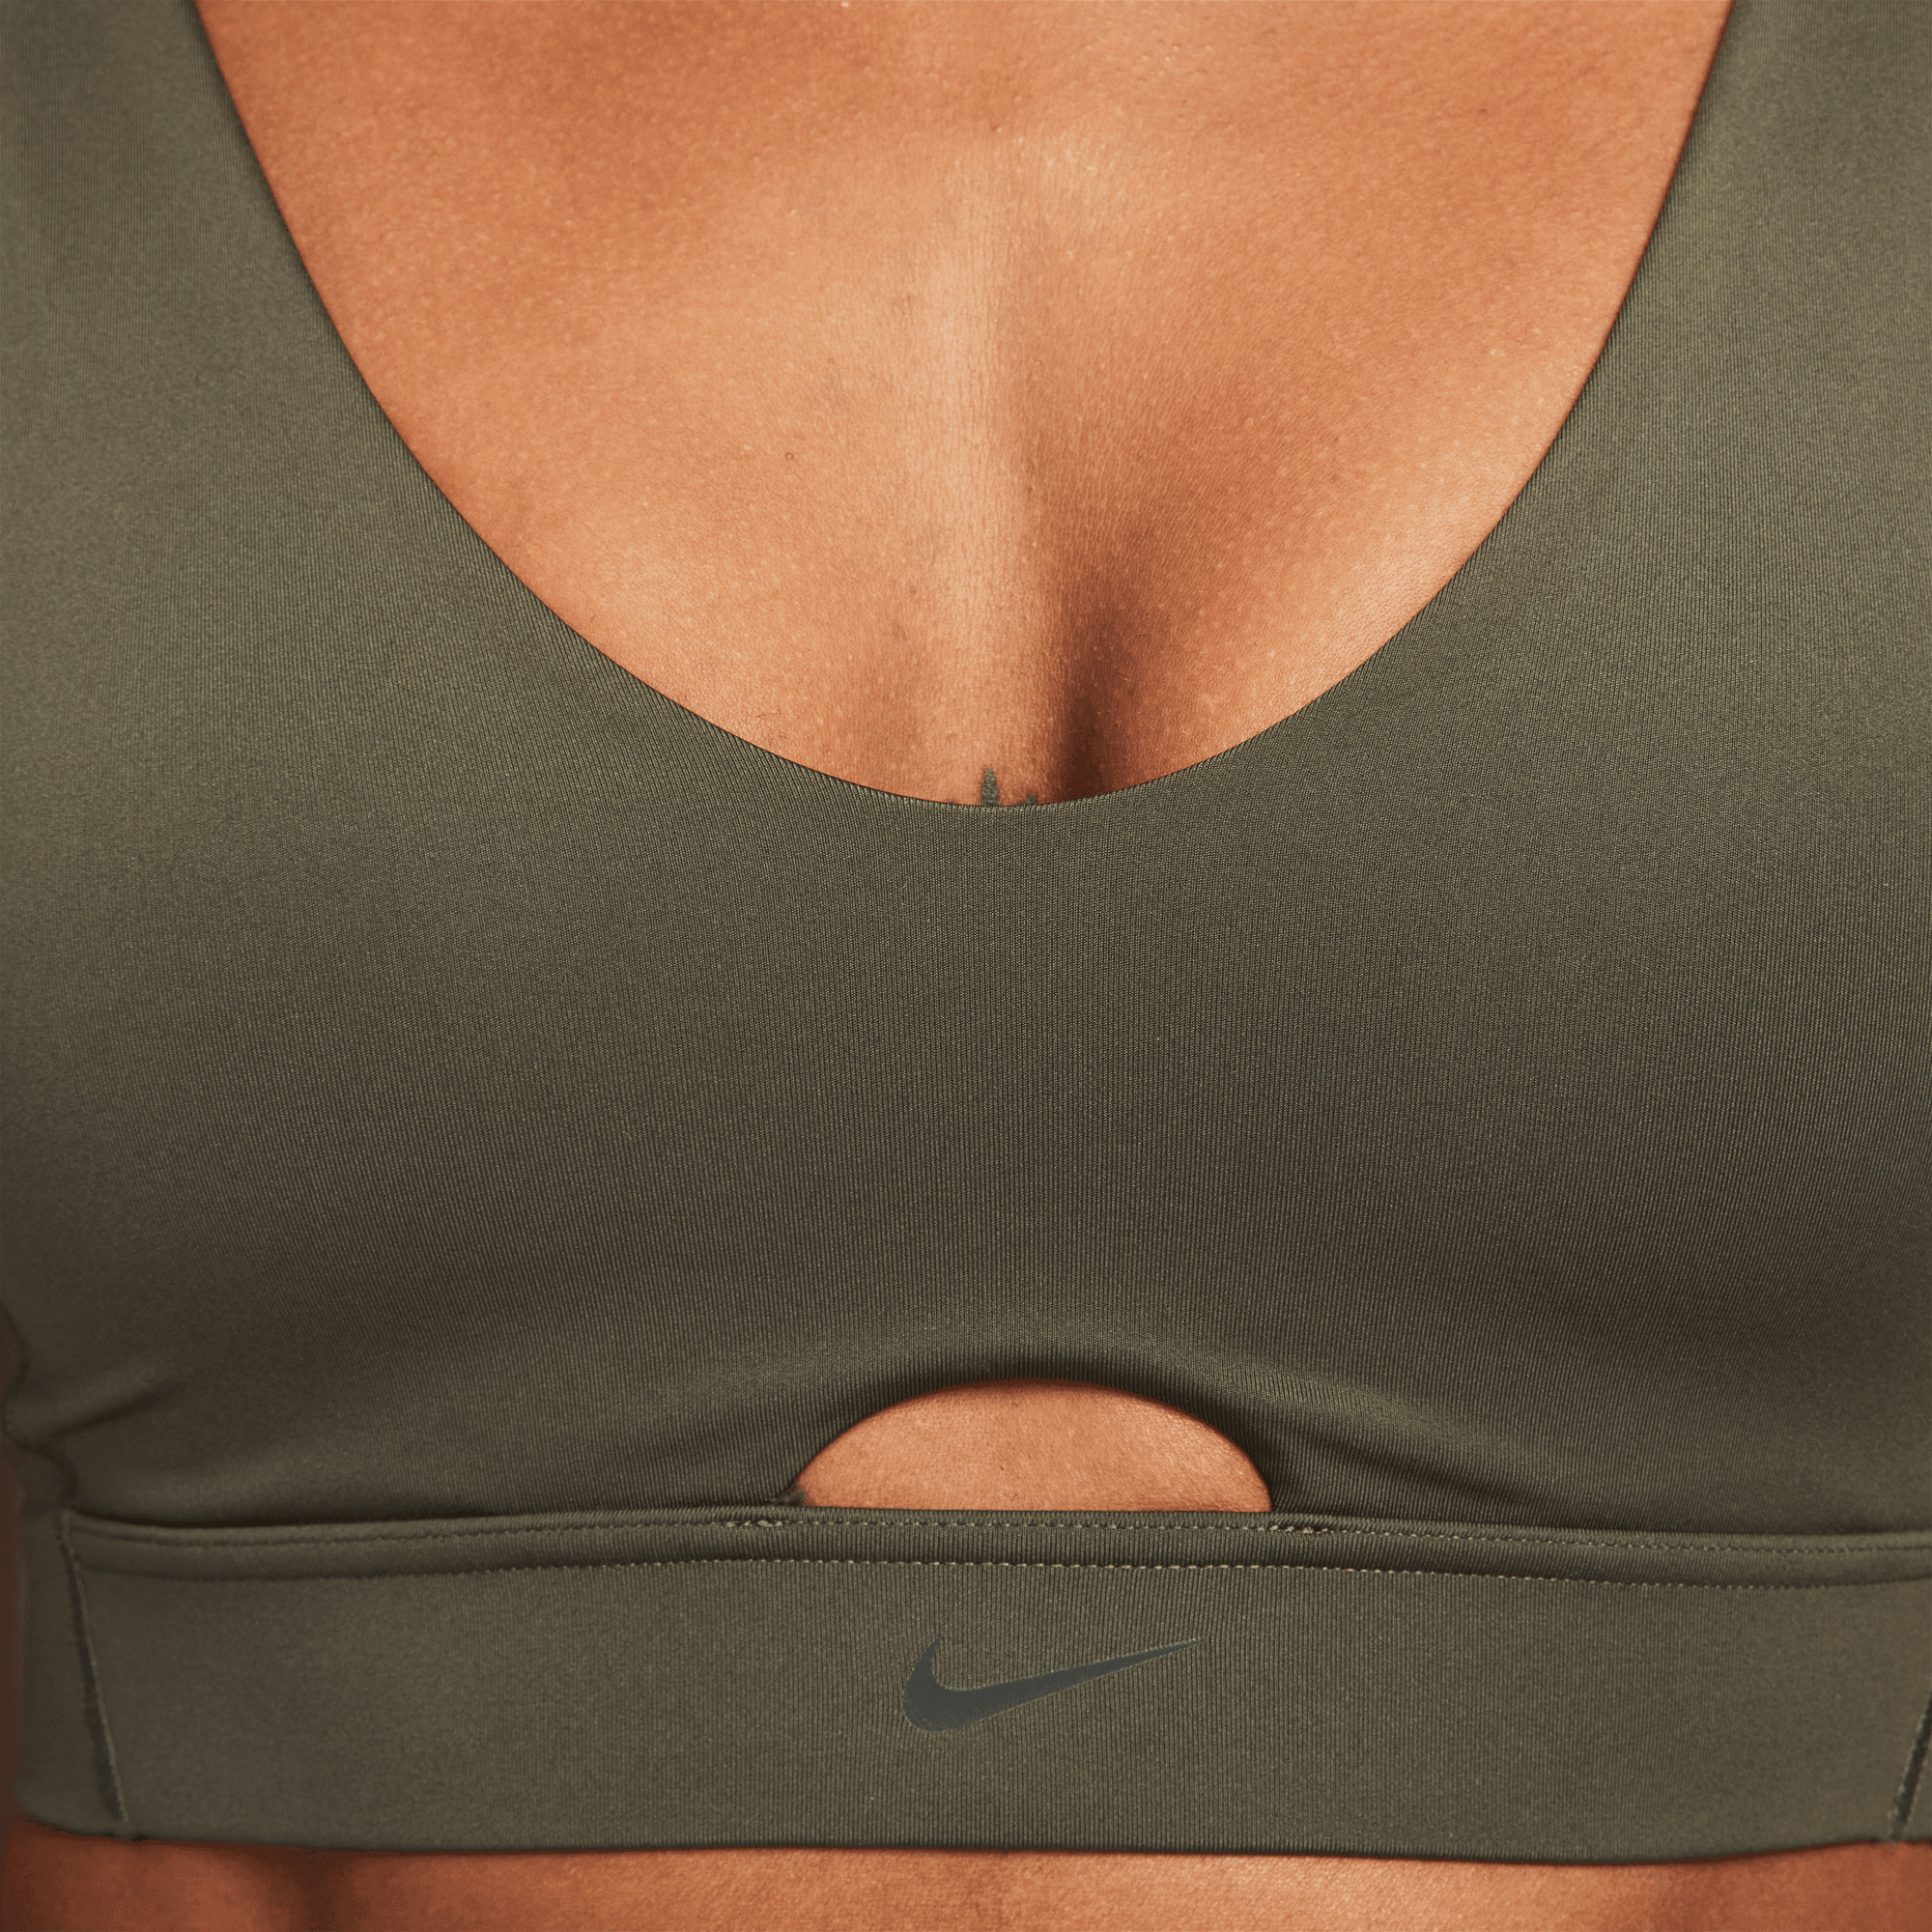 Pro Indy Plunge Medium Support Padded Sports Bra by Nike Online